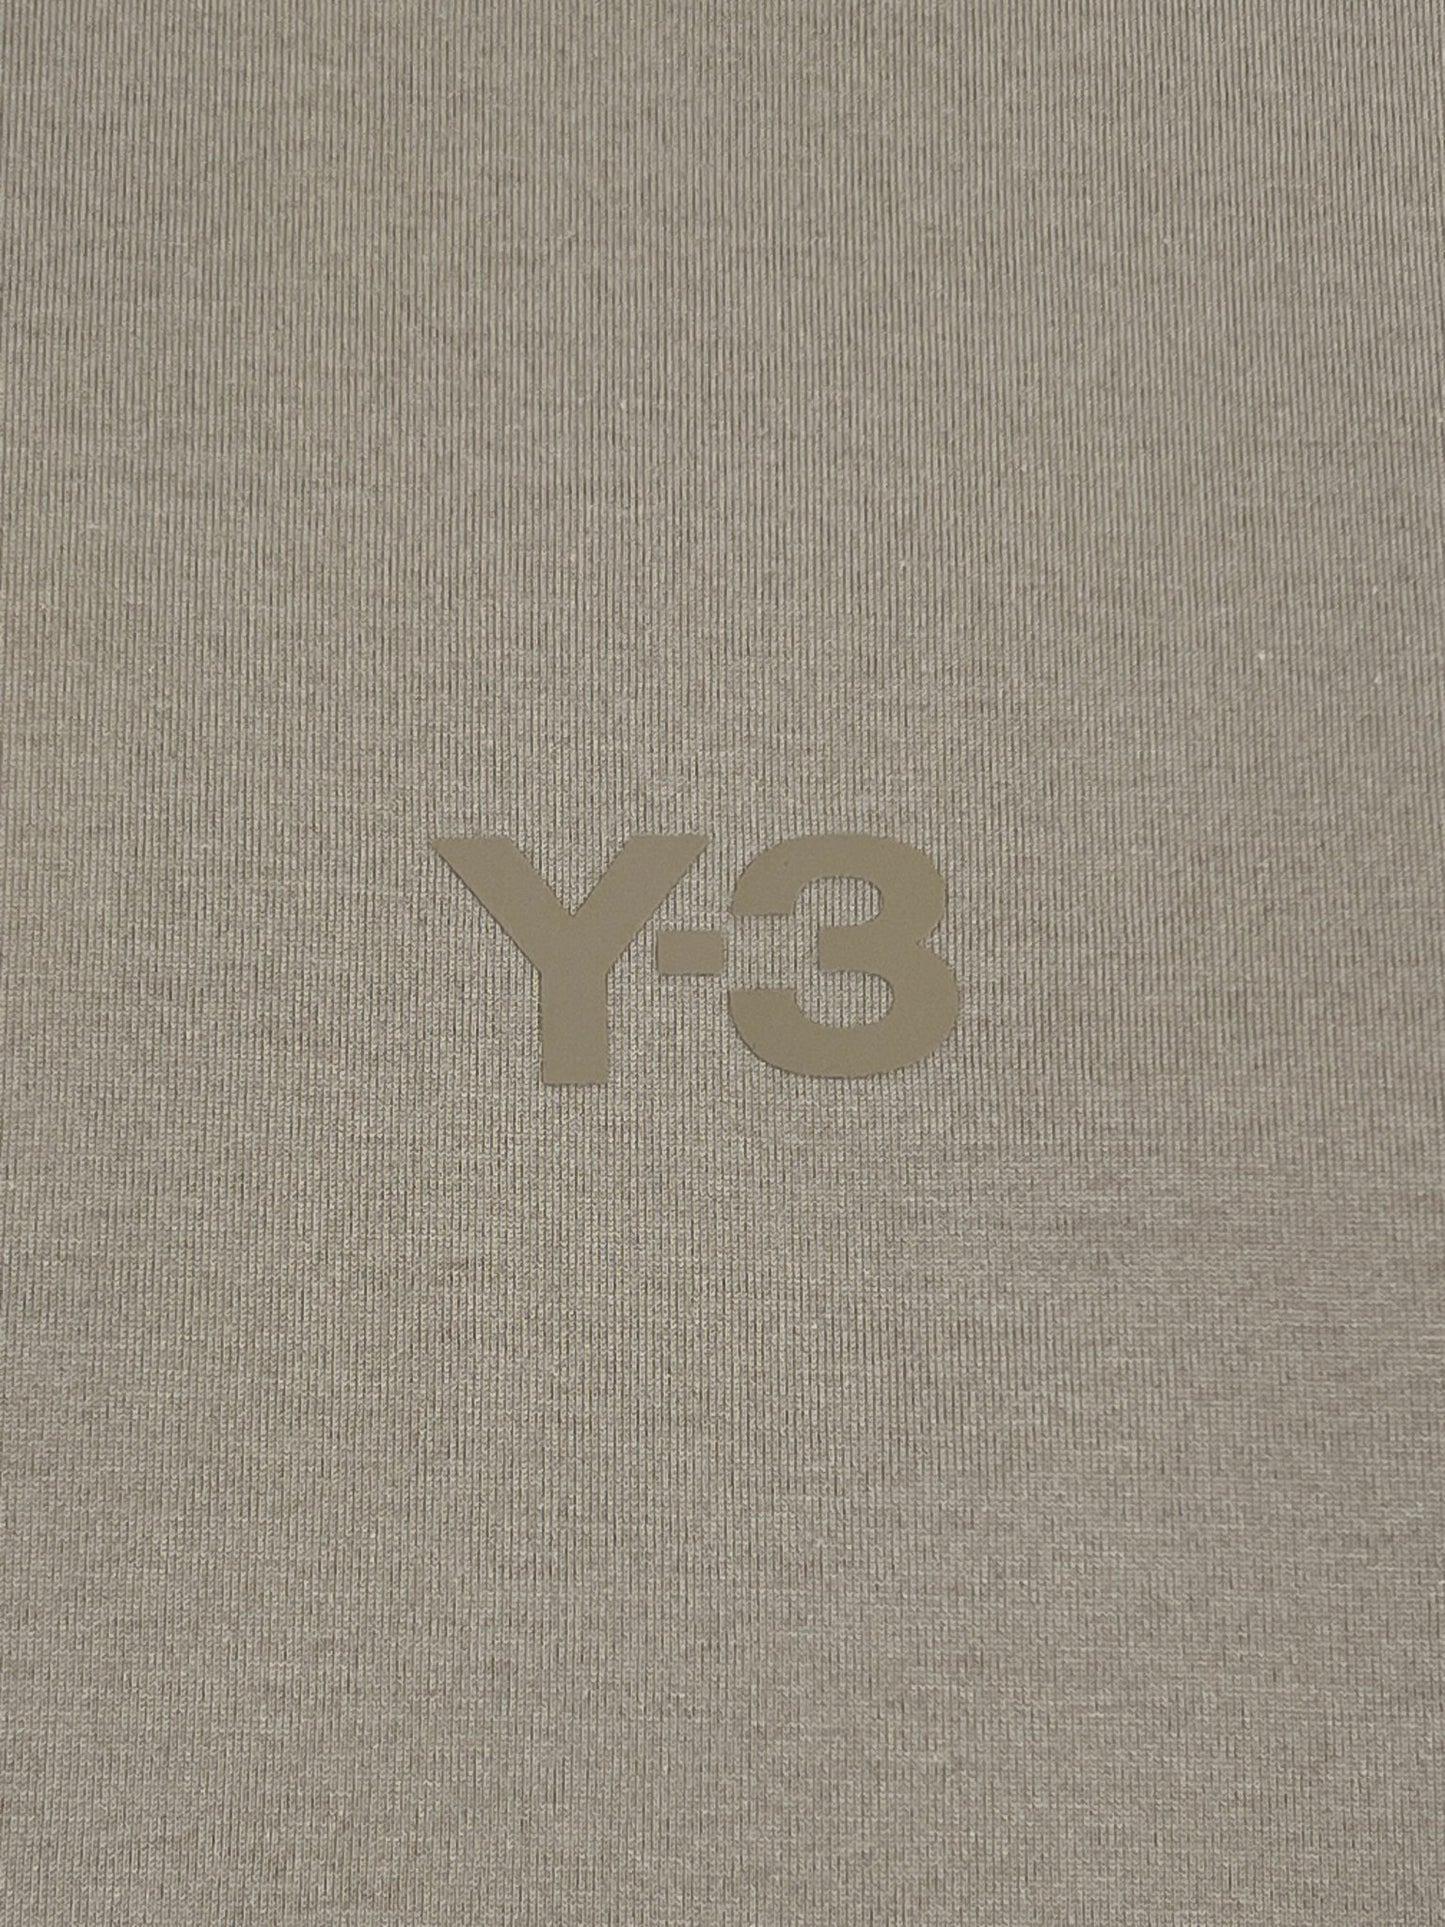 The Y-3 IV8223 RELAXED SS TEE CLABRO logo on a beige relaxed fit t-shirt by ADIDAS x Y-3.